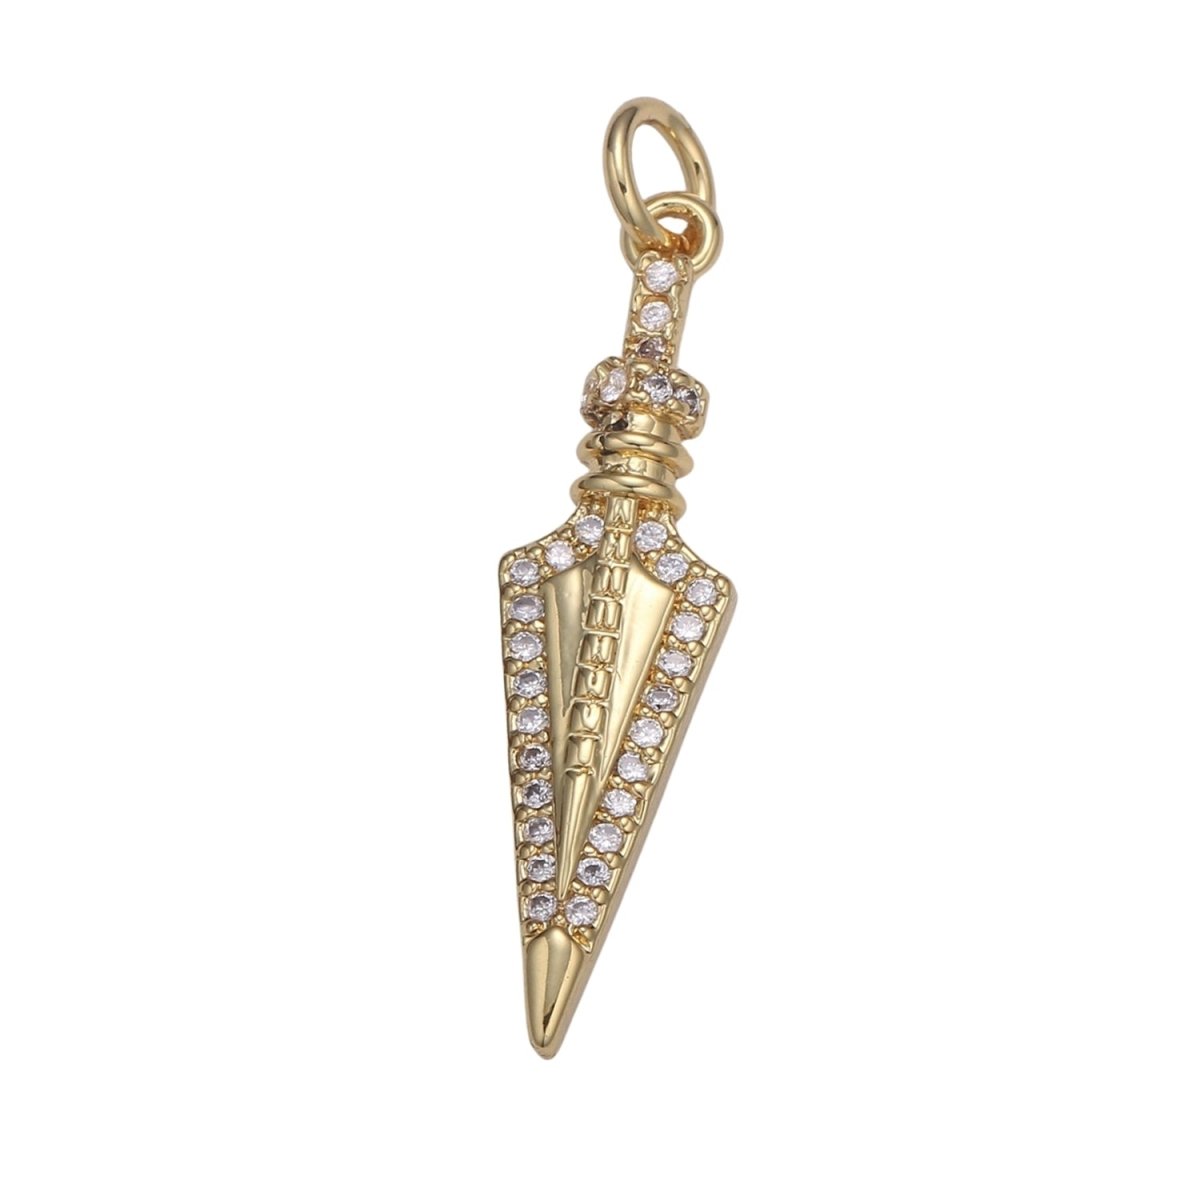 24k Gold Micro Pave Peg Charm, Cubic Zirconia Spear Pendant Charm, Charm, For DIY Jewelry E-205 E-790 - DLUXCA